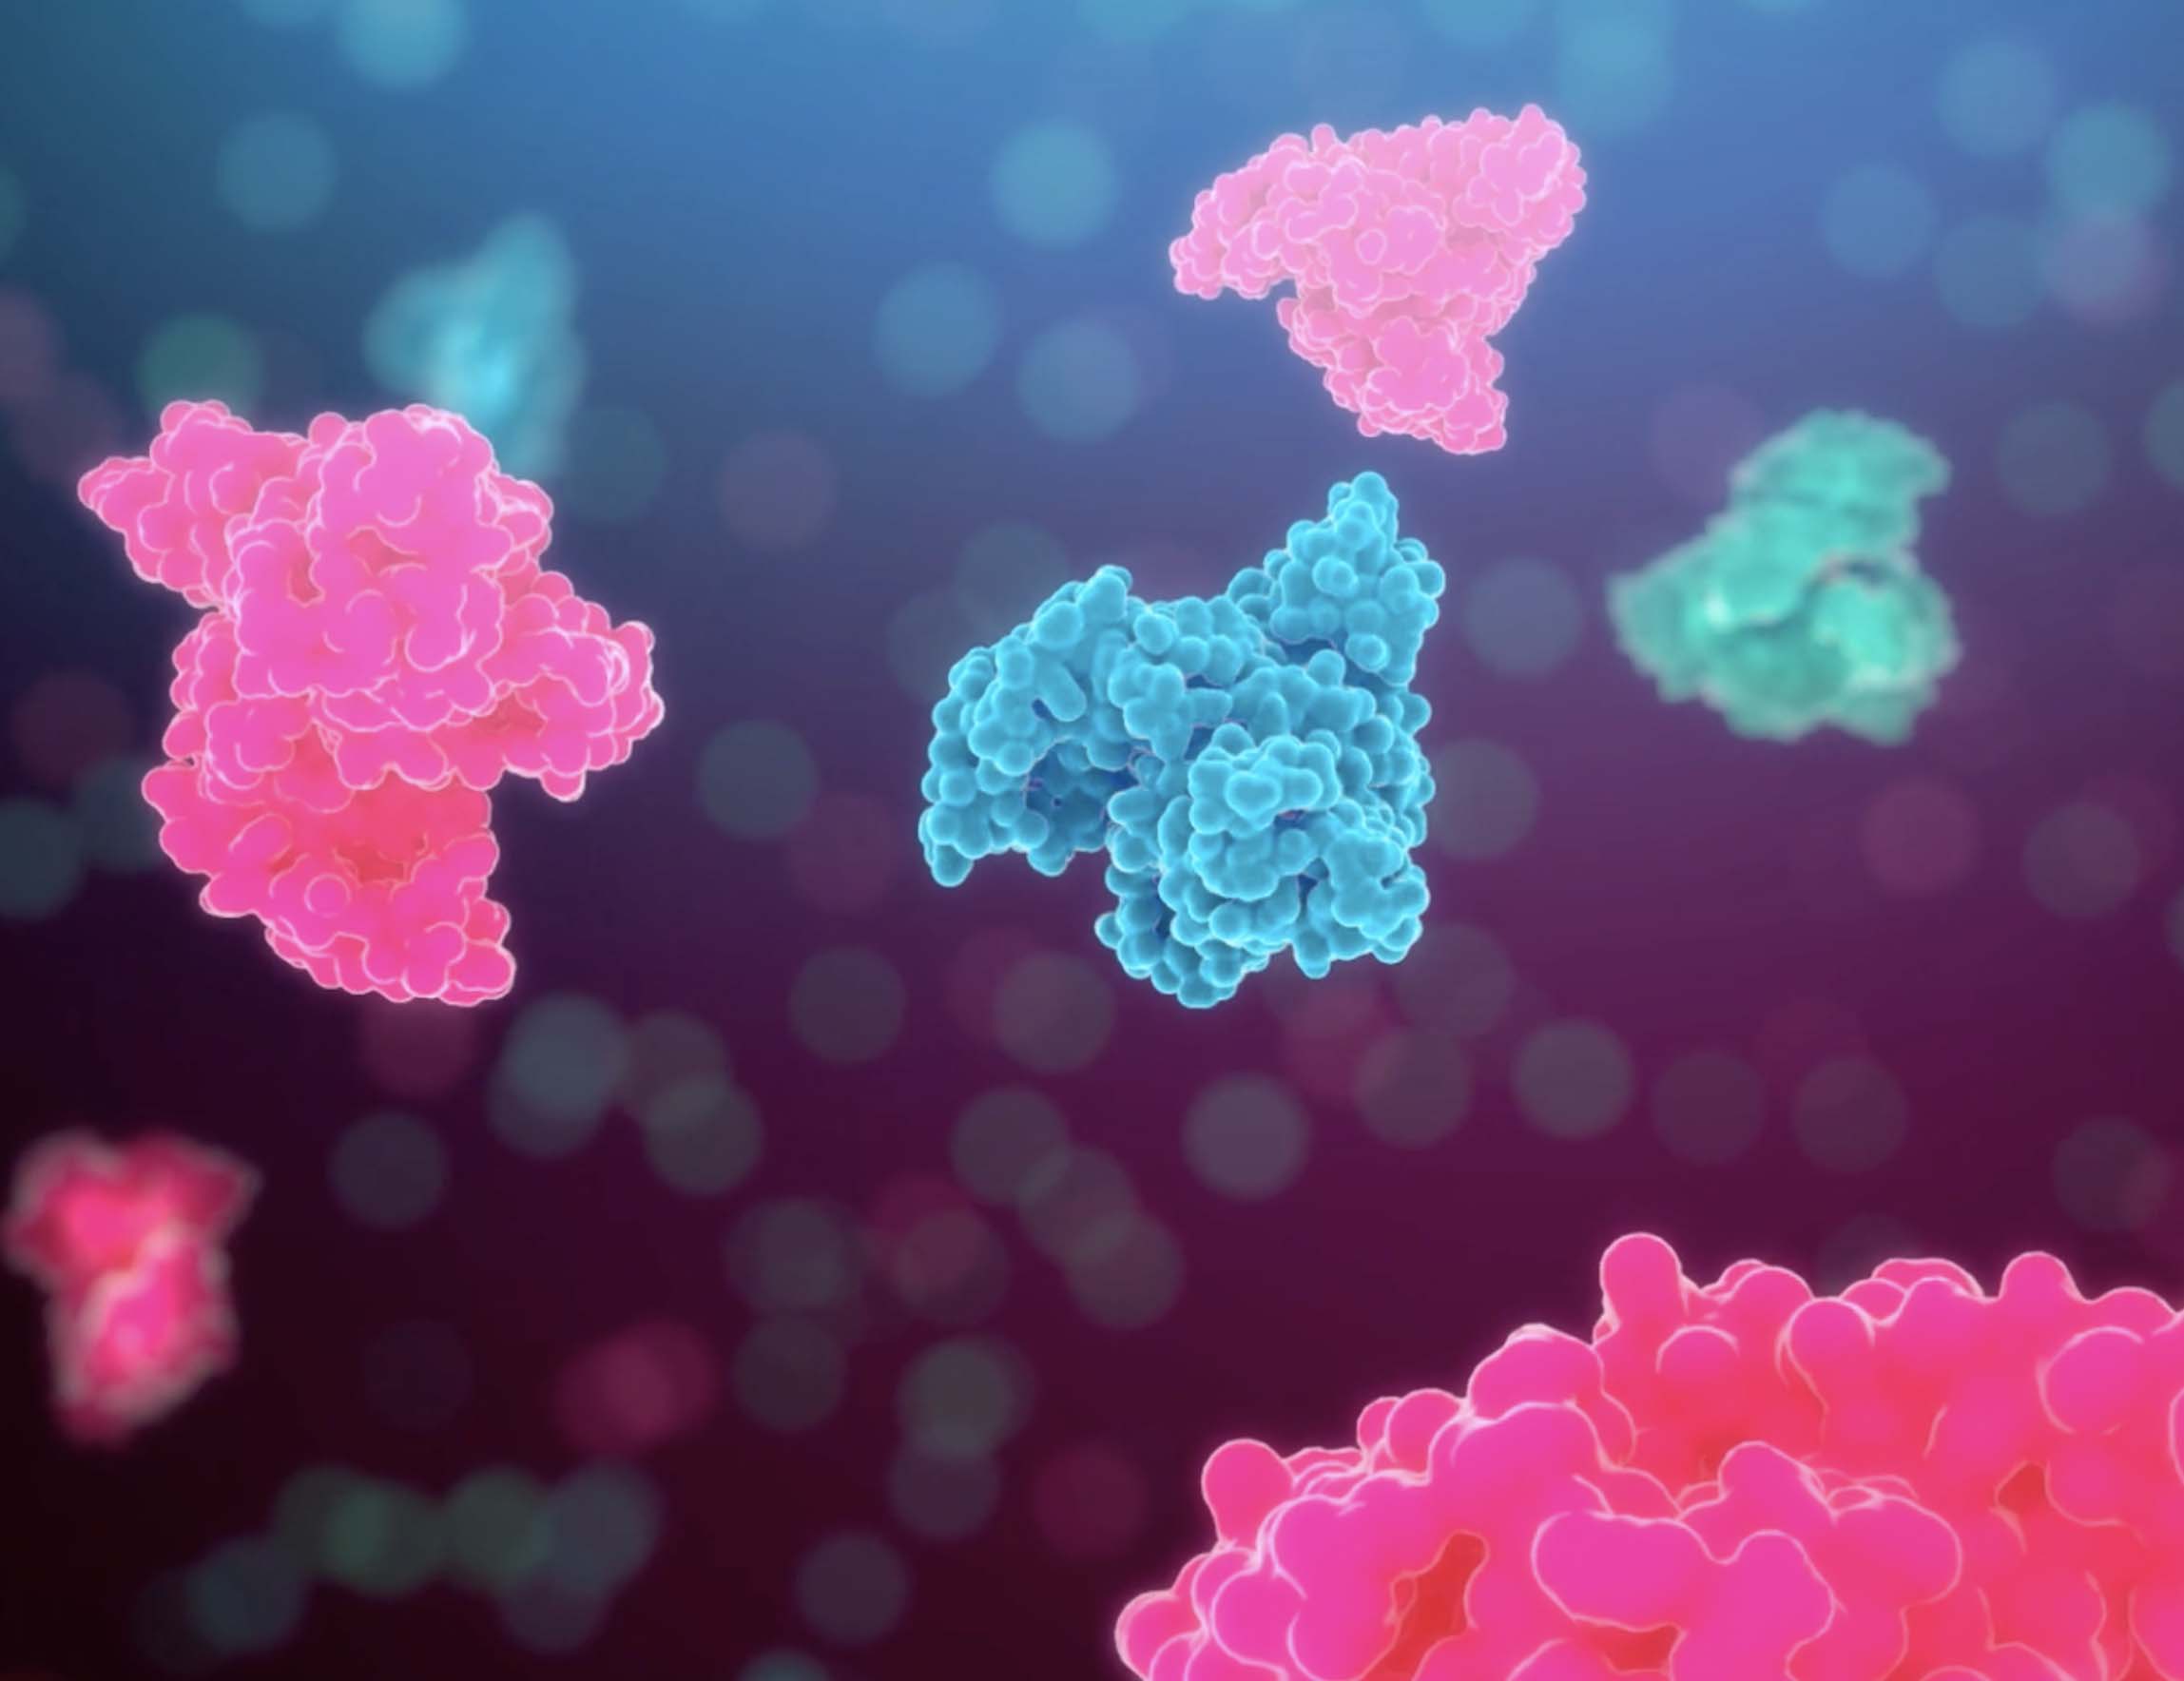 This image shows 3D animation of proteins for Albert Heck's research on proteomics